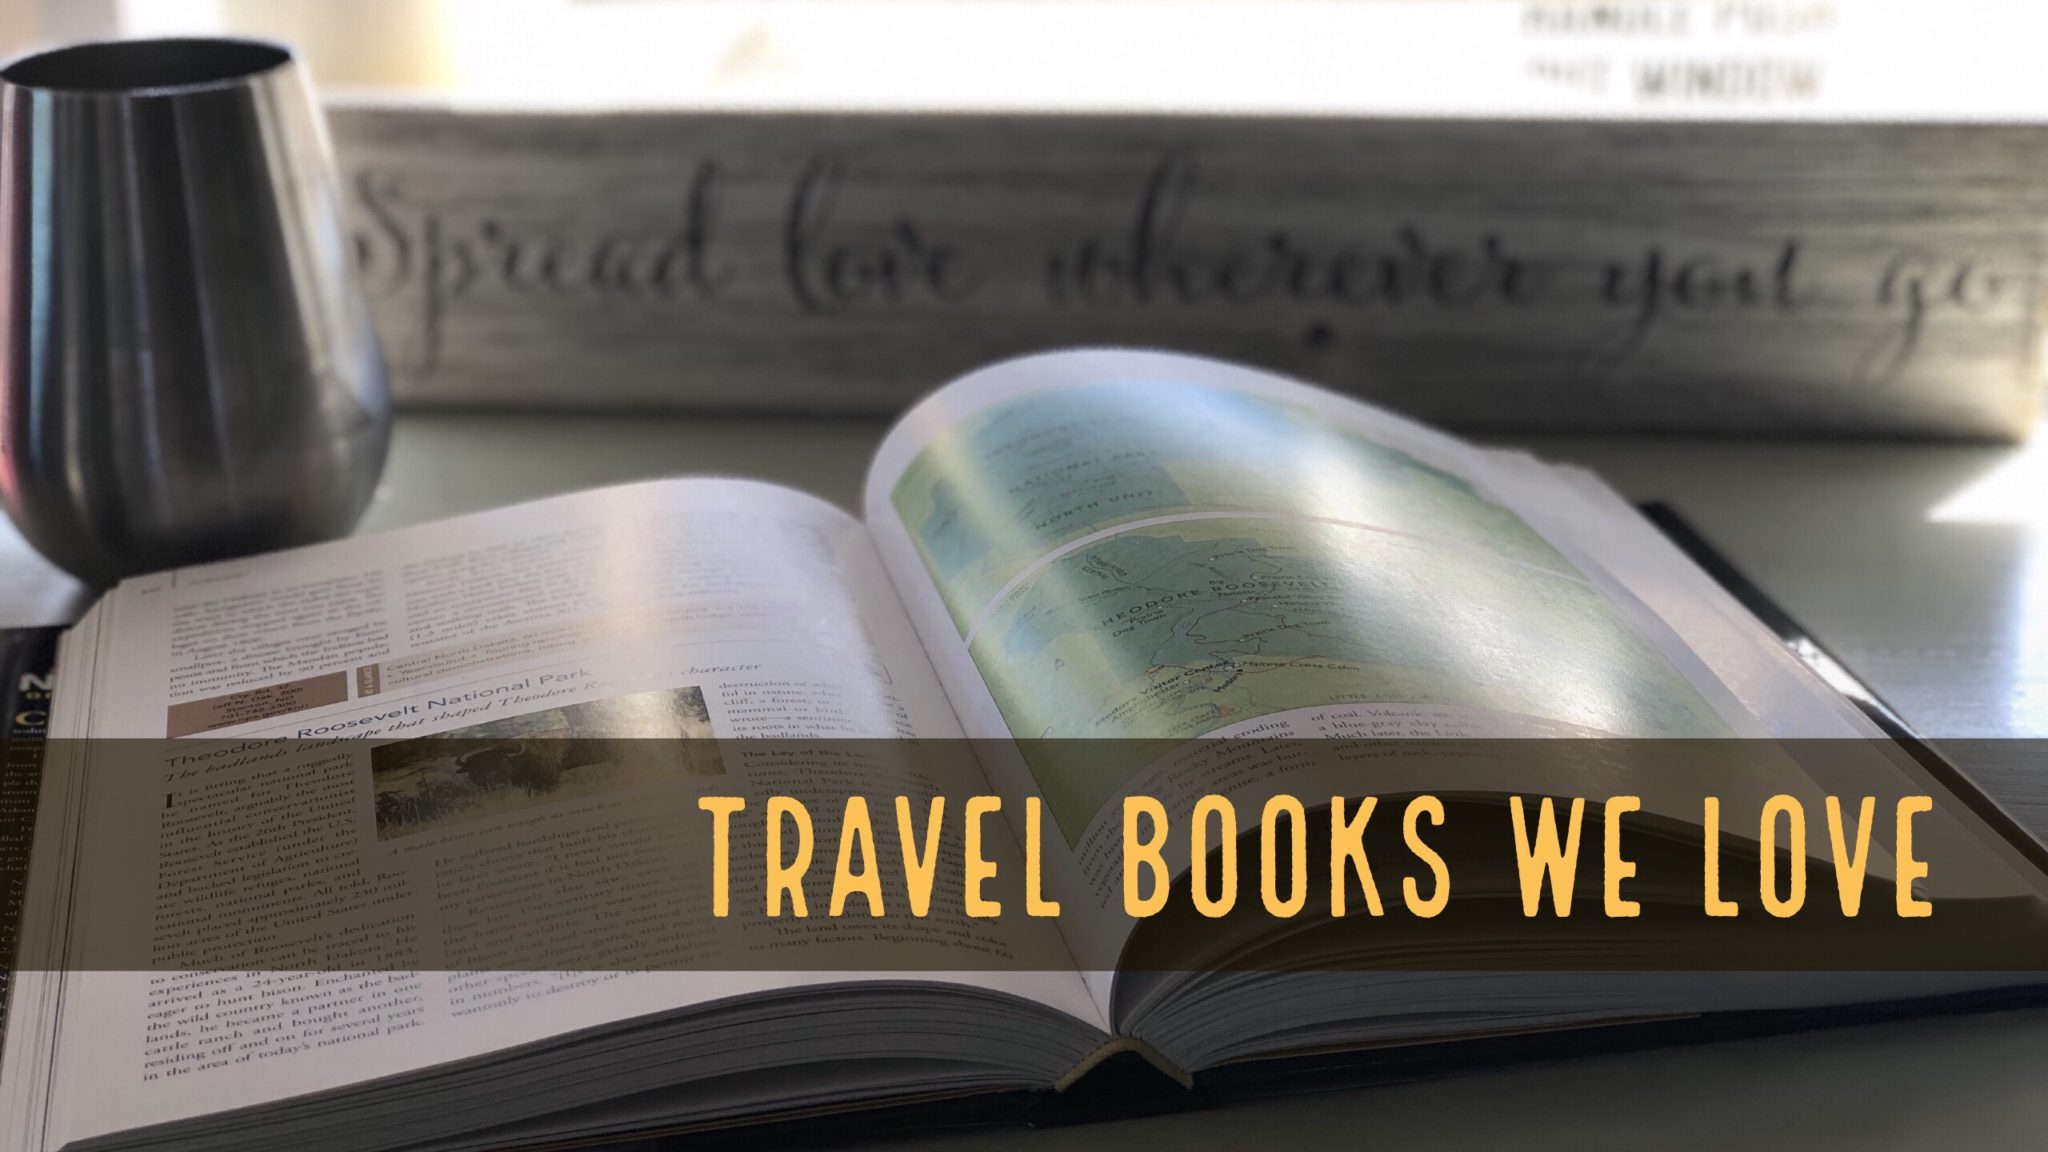 Episode 32 – Travel Books and a Preview of the America’s National Parks Podcast